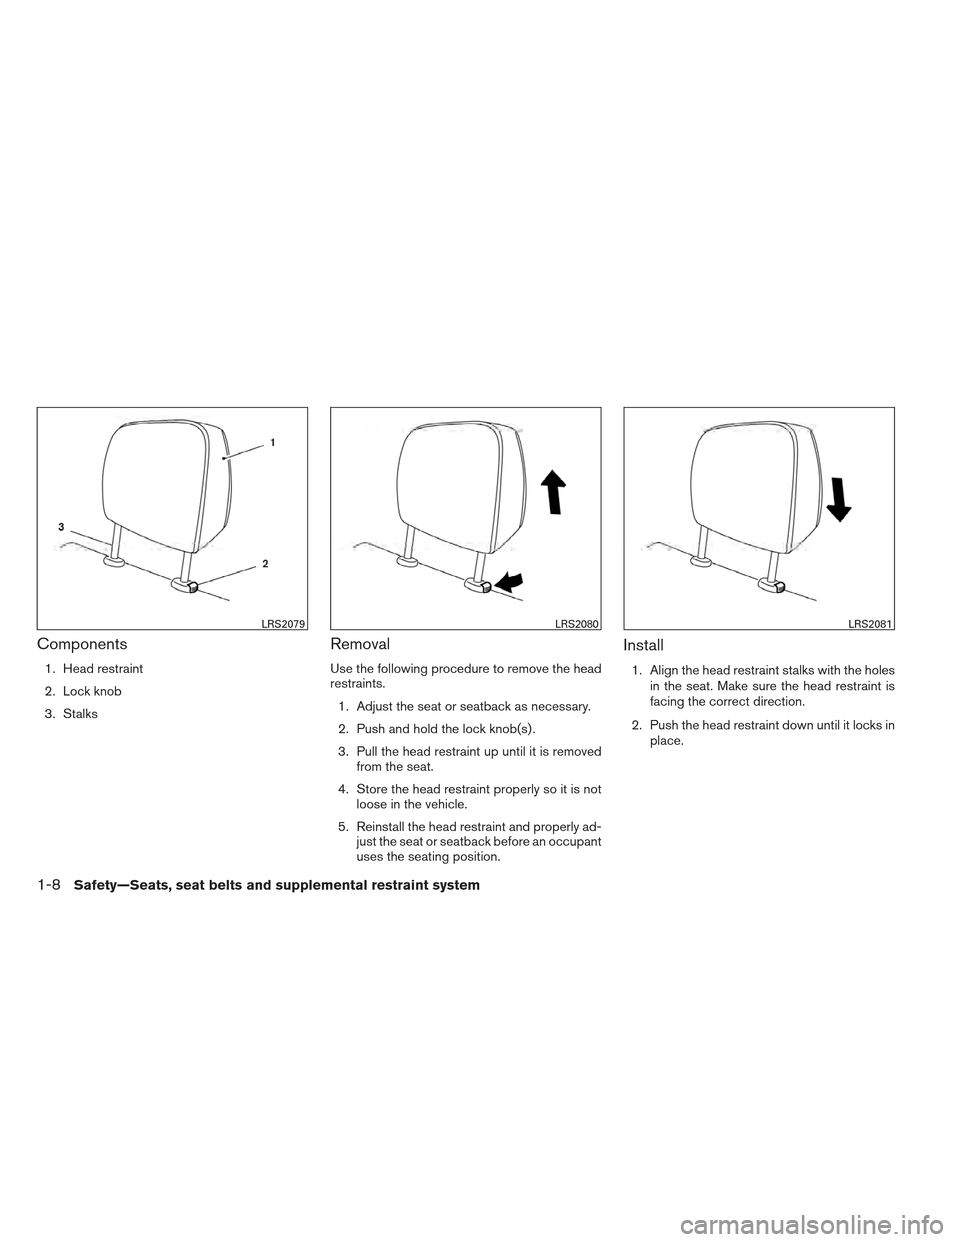 NISSAN XTERRA 2012 N50 / 2.G Owners Manual Components
1. Head restraint
2. Lock knob
3. Stalks
Removal
Use the following procedure to remove the head
restraints.1. Adjust the seat or seatback as necessary.
2. Push and hold the lock knob(s) .
3